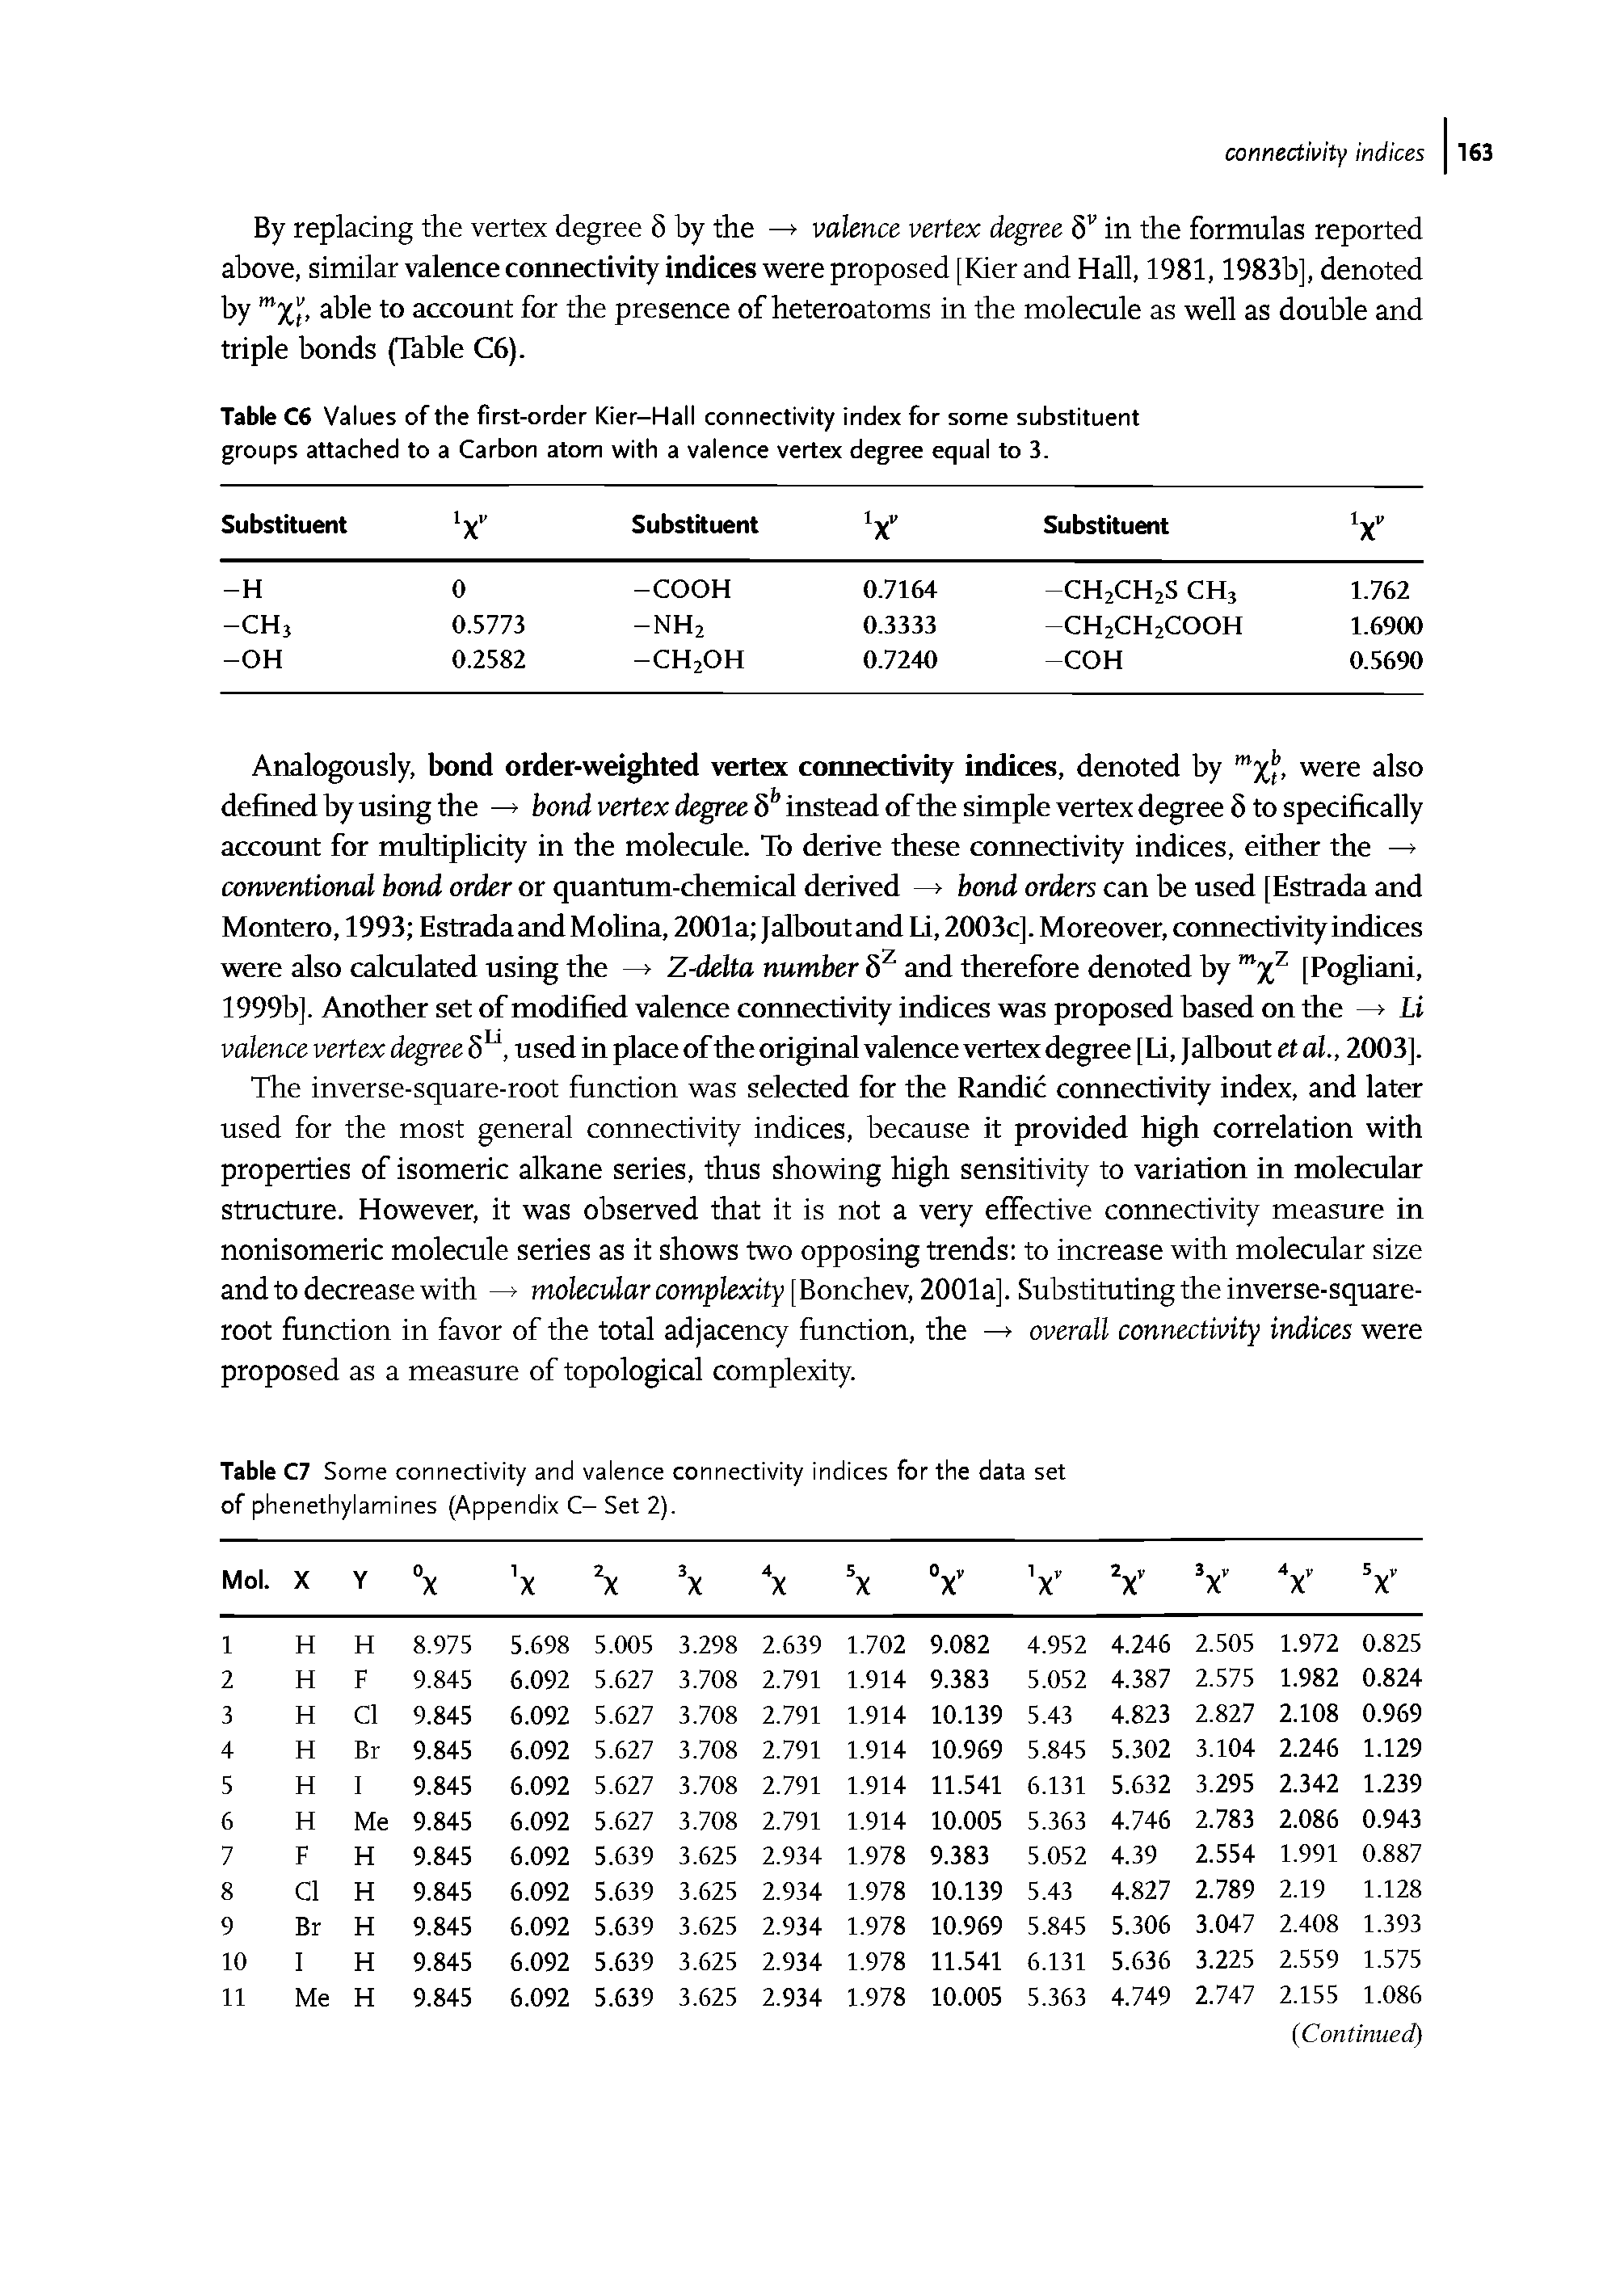 Table C7 Some connectivity and valence connectivity indices for the data set of phenethylamines (Appendix C- Set 2).